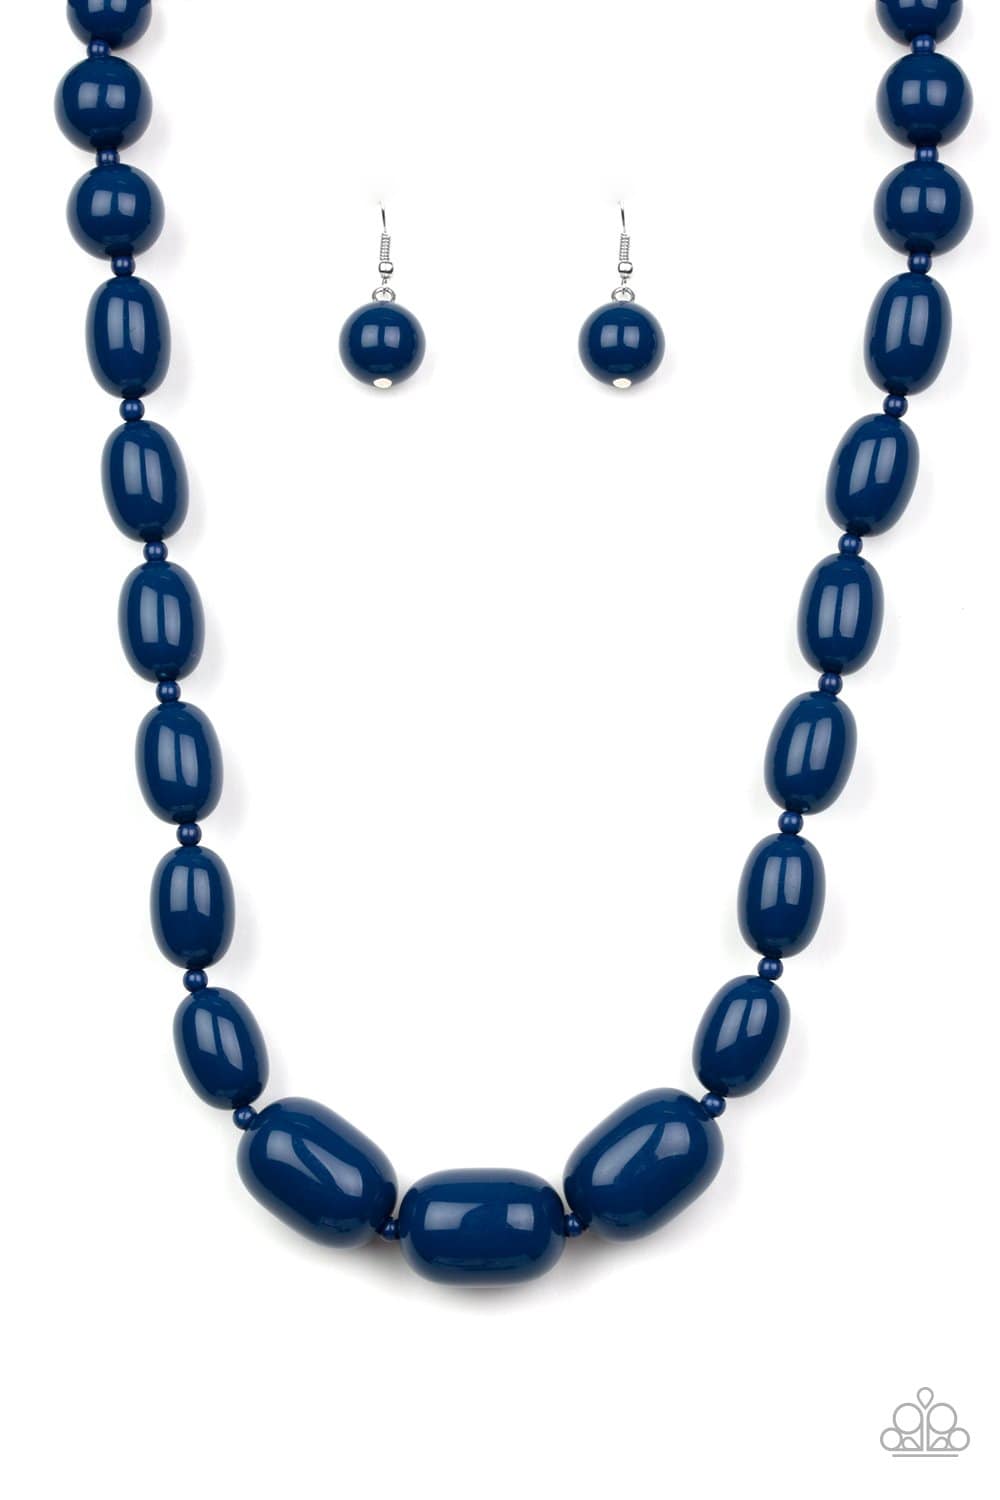 Poppin Popularity - Blue Bead Necklace - Paparazzi Accessories - GlaMarous Titi Jewels